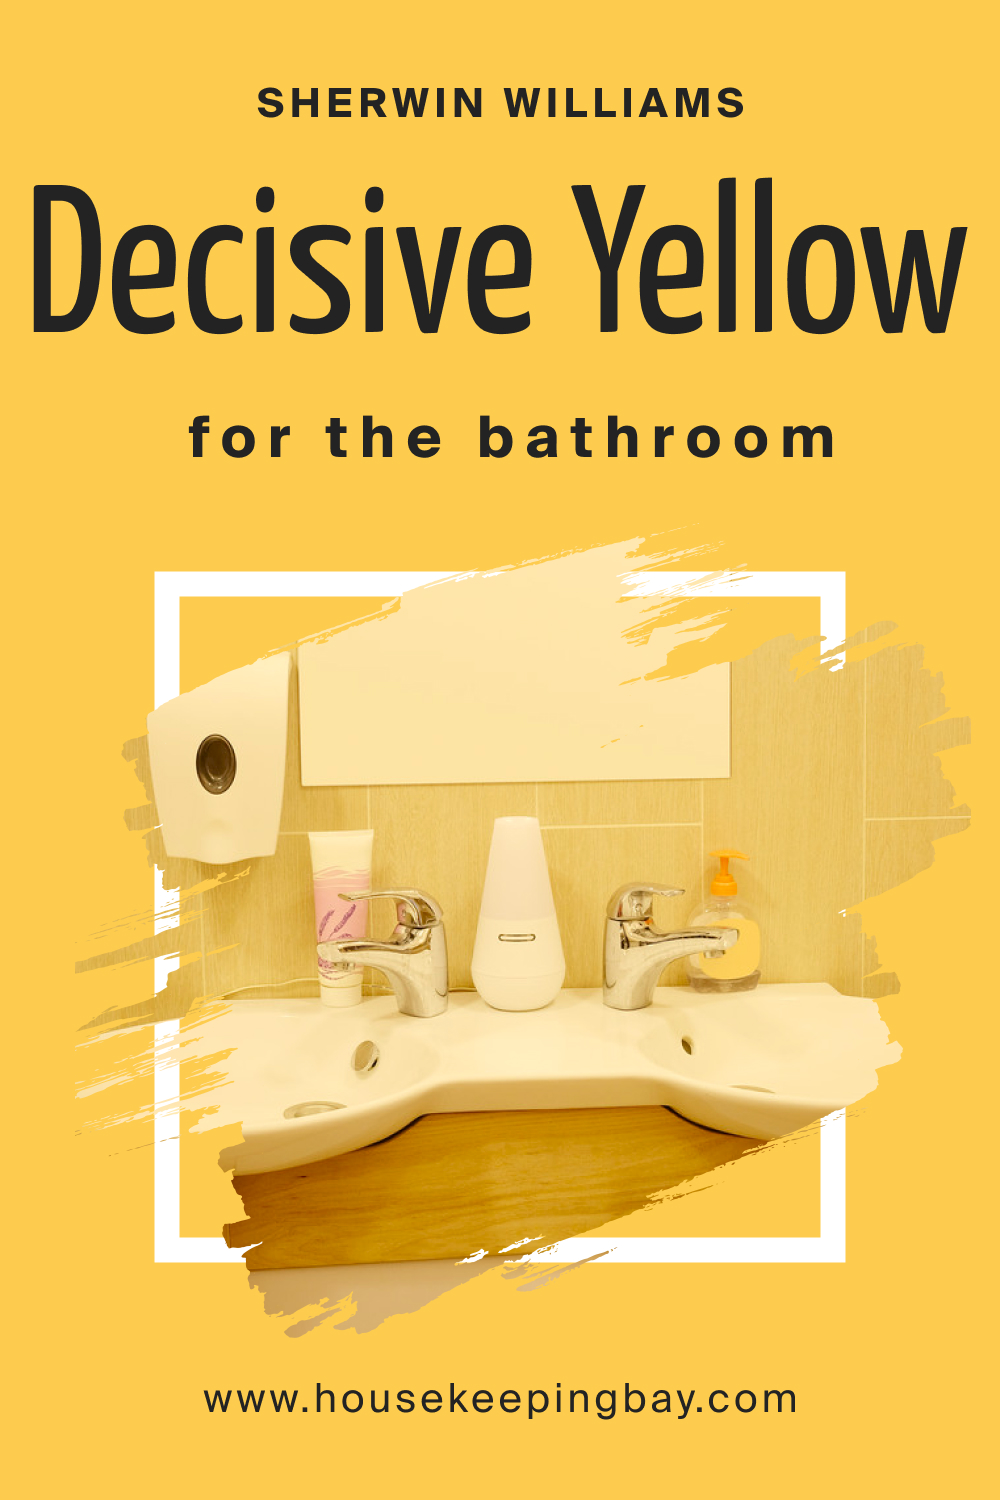 Sherwin Williams. Decisive Yellow SW 6902 For the Bathroom